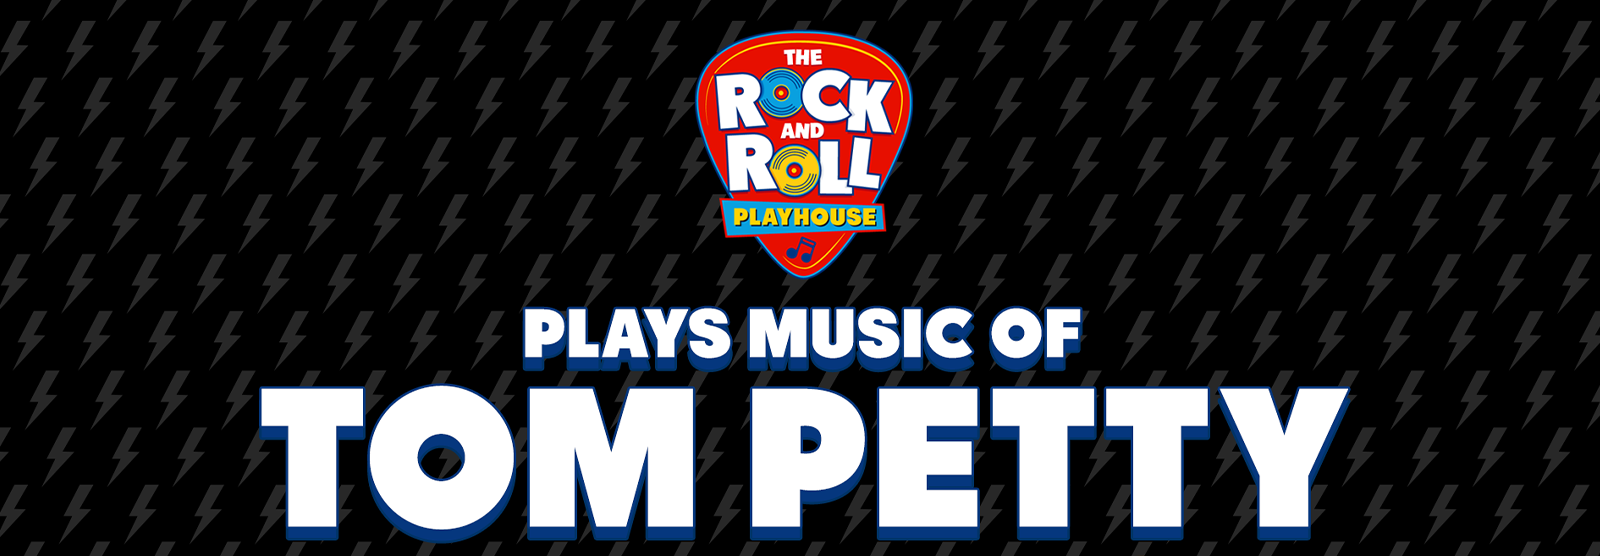 The Rock and Roll Playhouse Plays Music of Tom Petty + More for Kids